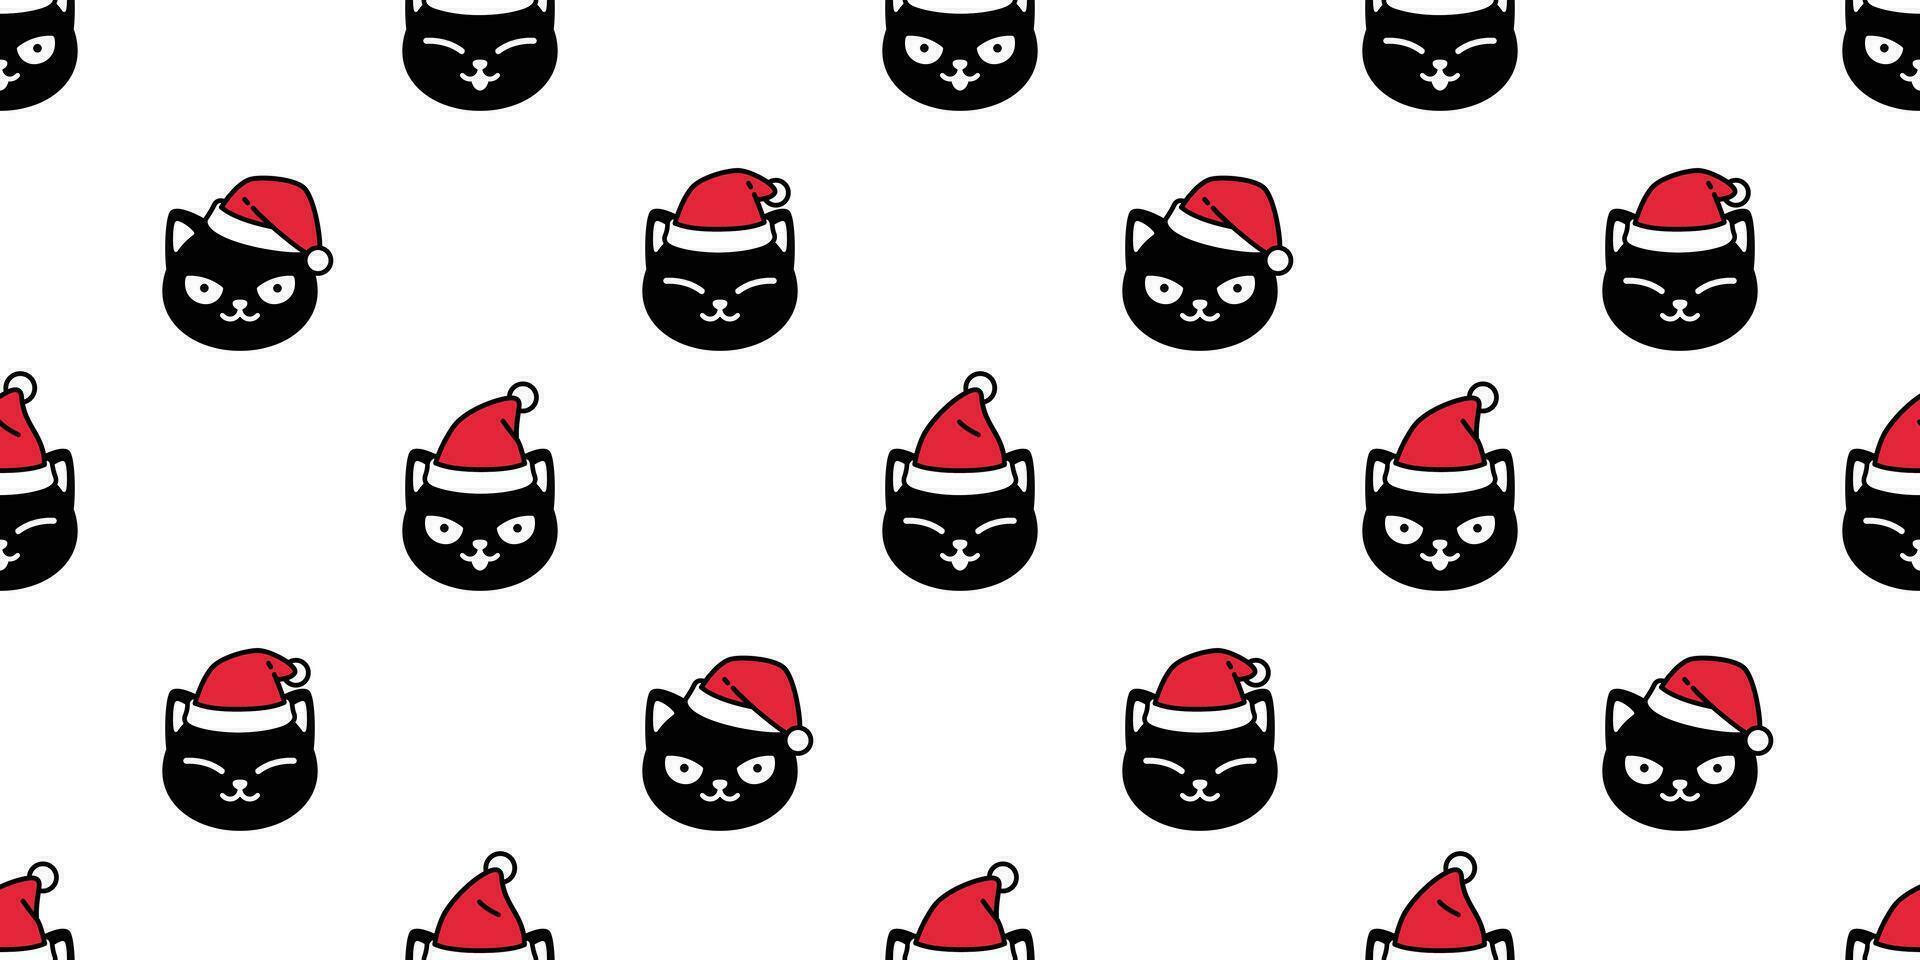 cat seamless pattern Christmas vector Santa Claus hat kitten cartoon scarf isolated repeat wallpaper tile background illustration doodle design